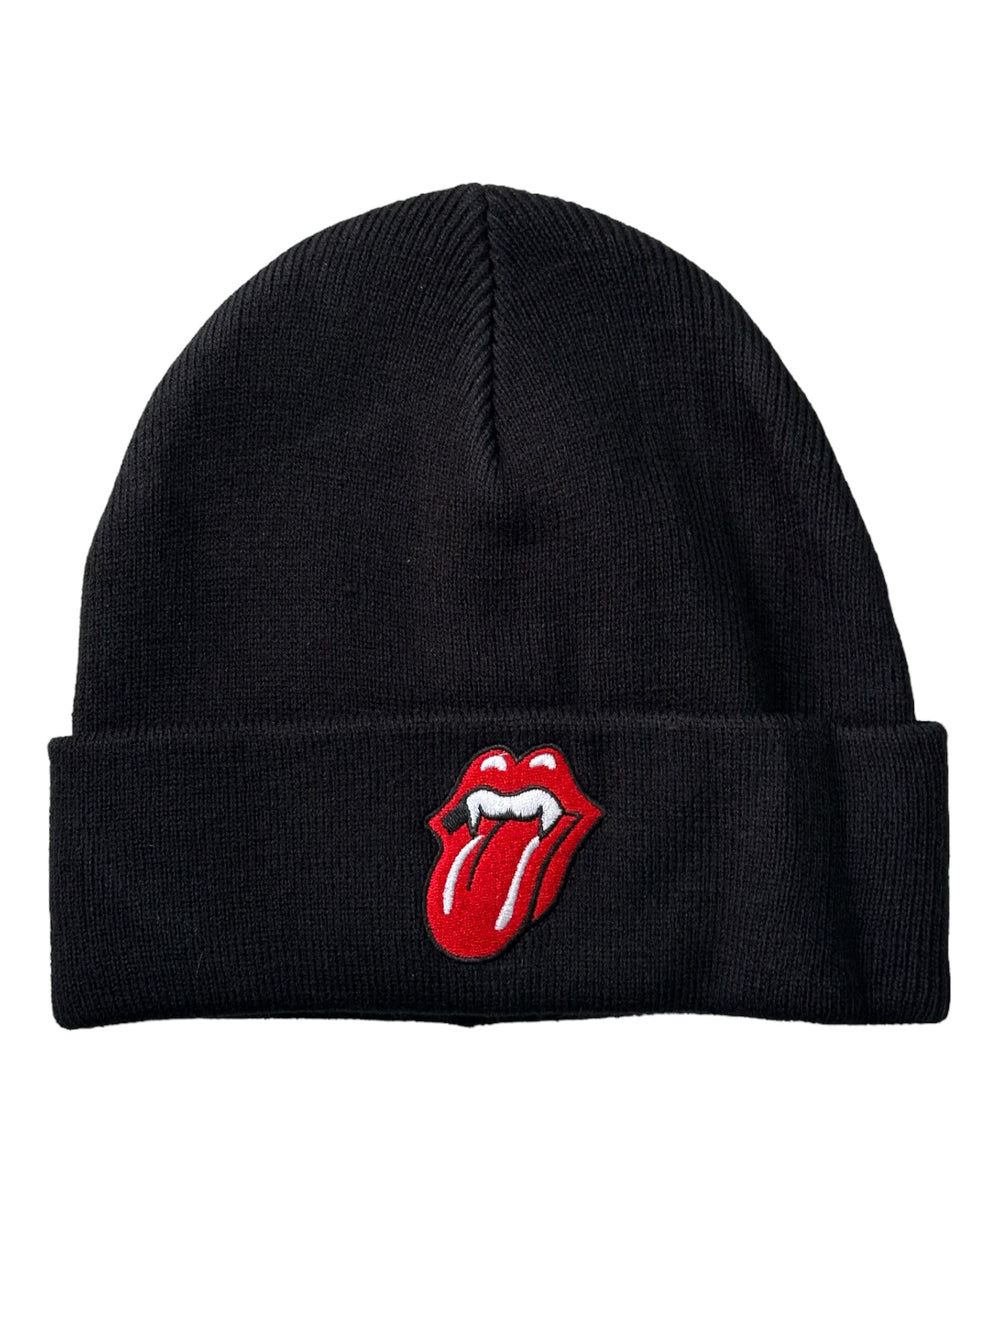 Rolling Stones The Official Roll Up Rolled Up Hat Tongue One Size Fits All - NEW